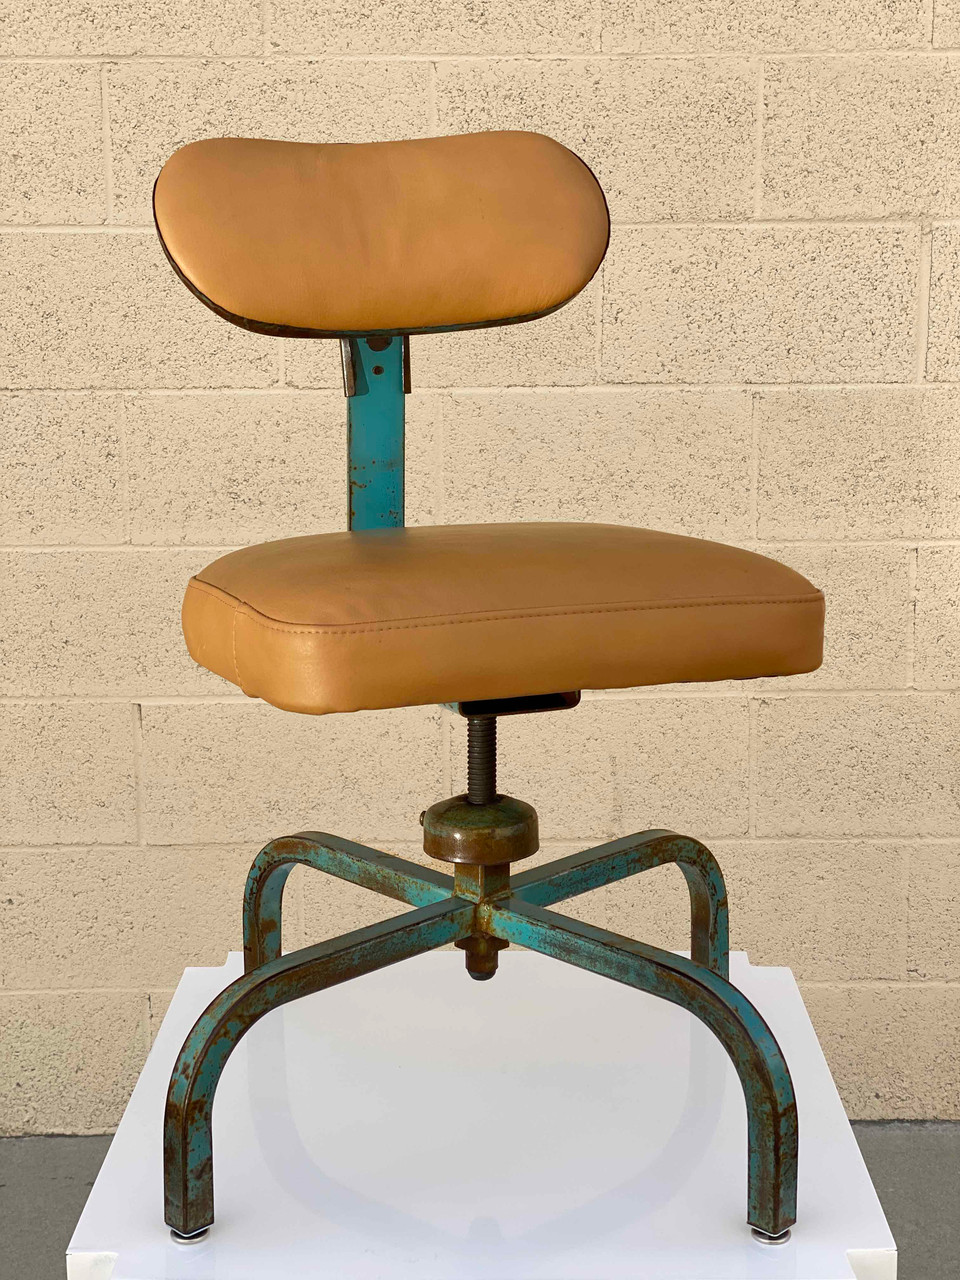 SOLD - Vintage Industrial Office Chair, Made By WELCH METAL PRODUCTS inc -  Rehab Vintage Interiors